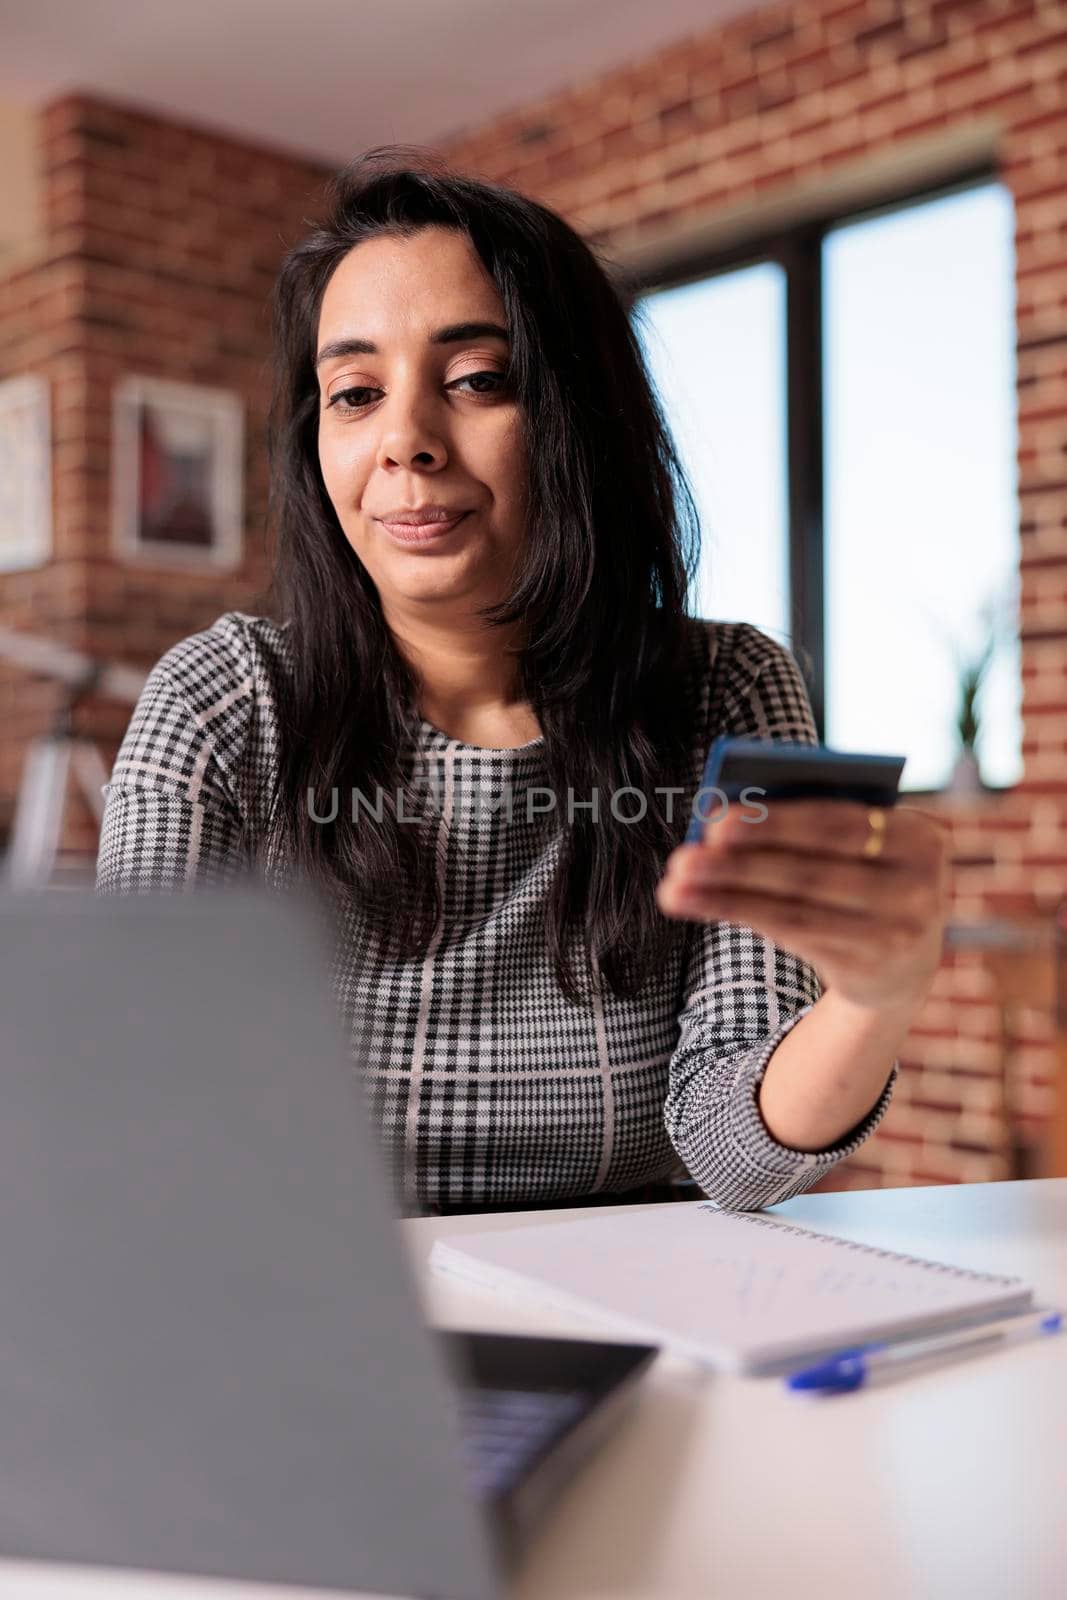 Indian woman making purchase online shopping on retail store website, using credit card to buy via electronic banking transaction. Paying on internet network, sale discount shop.